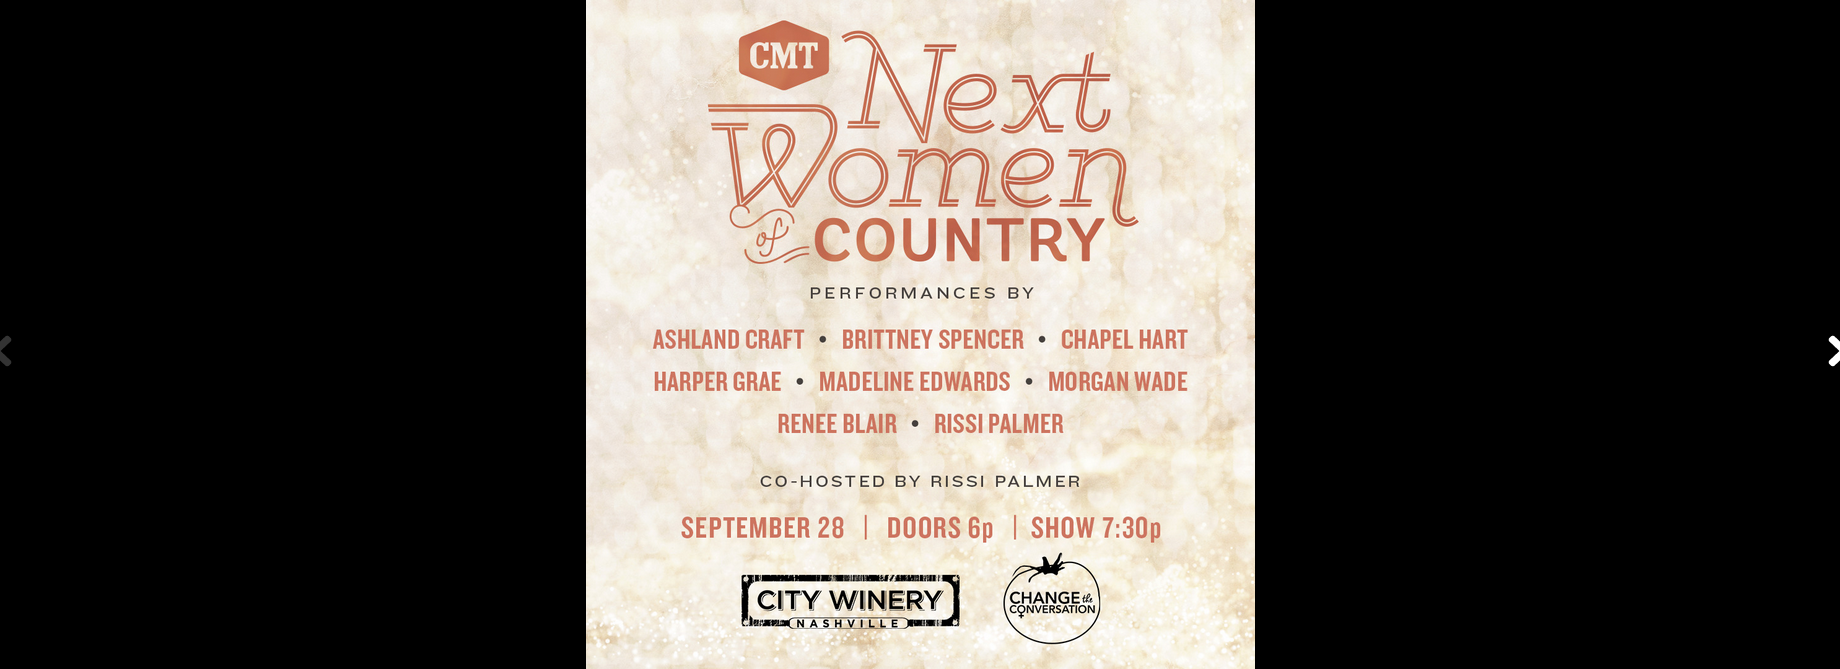 CMT Announces Lineup for “Next Women Of Country” Event